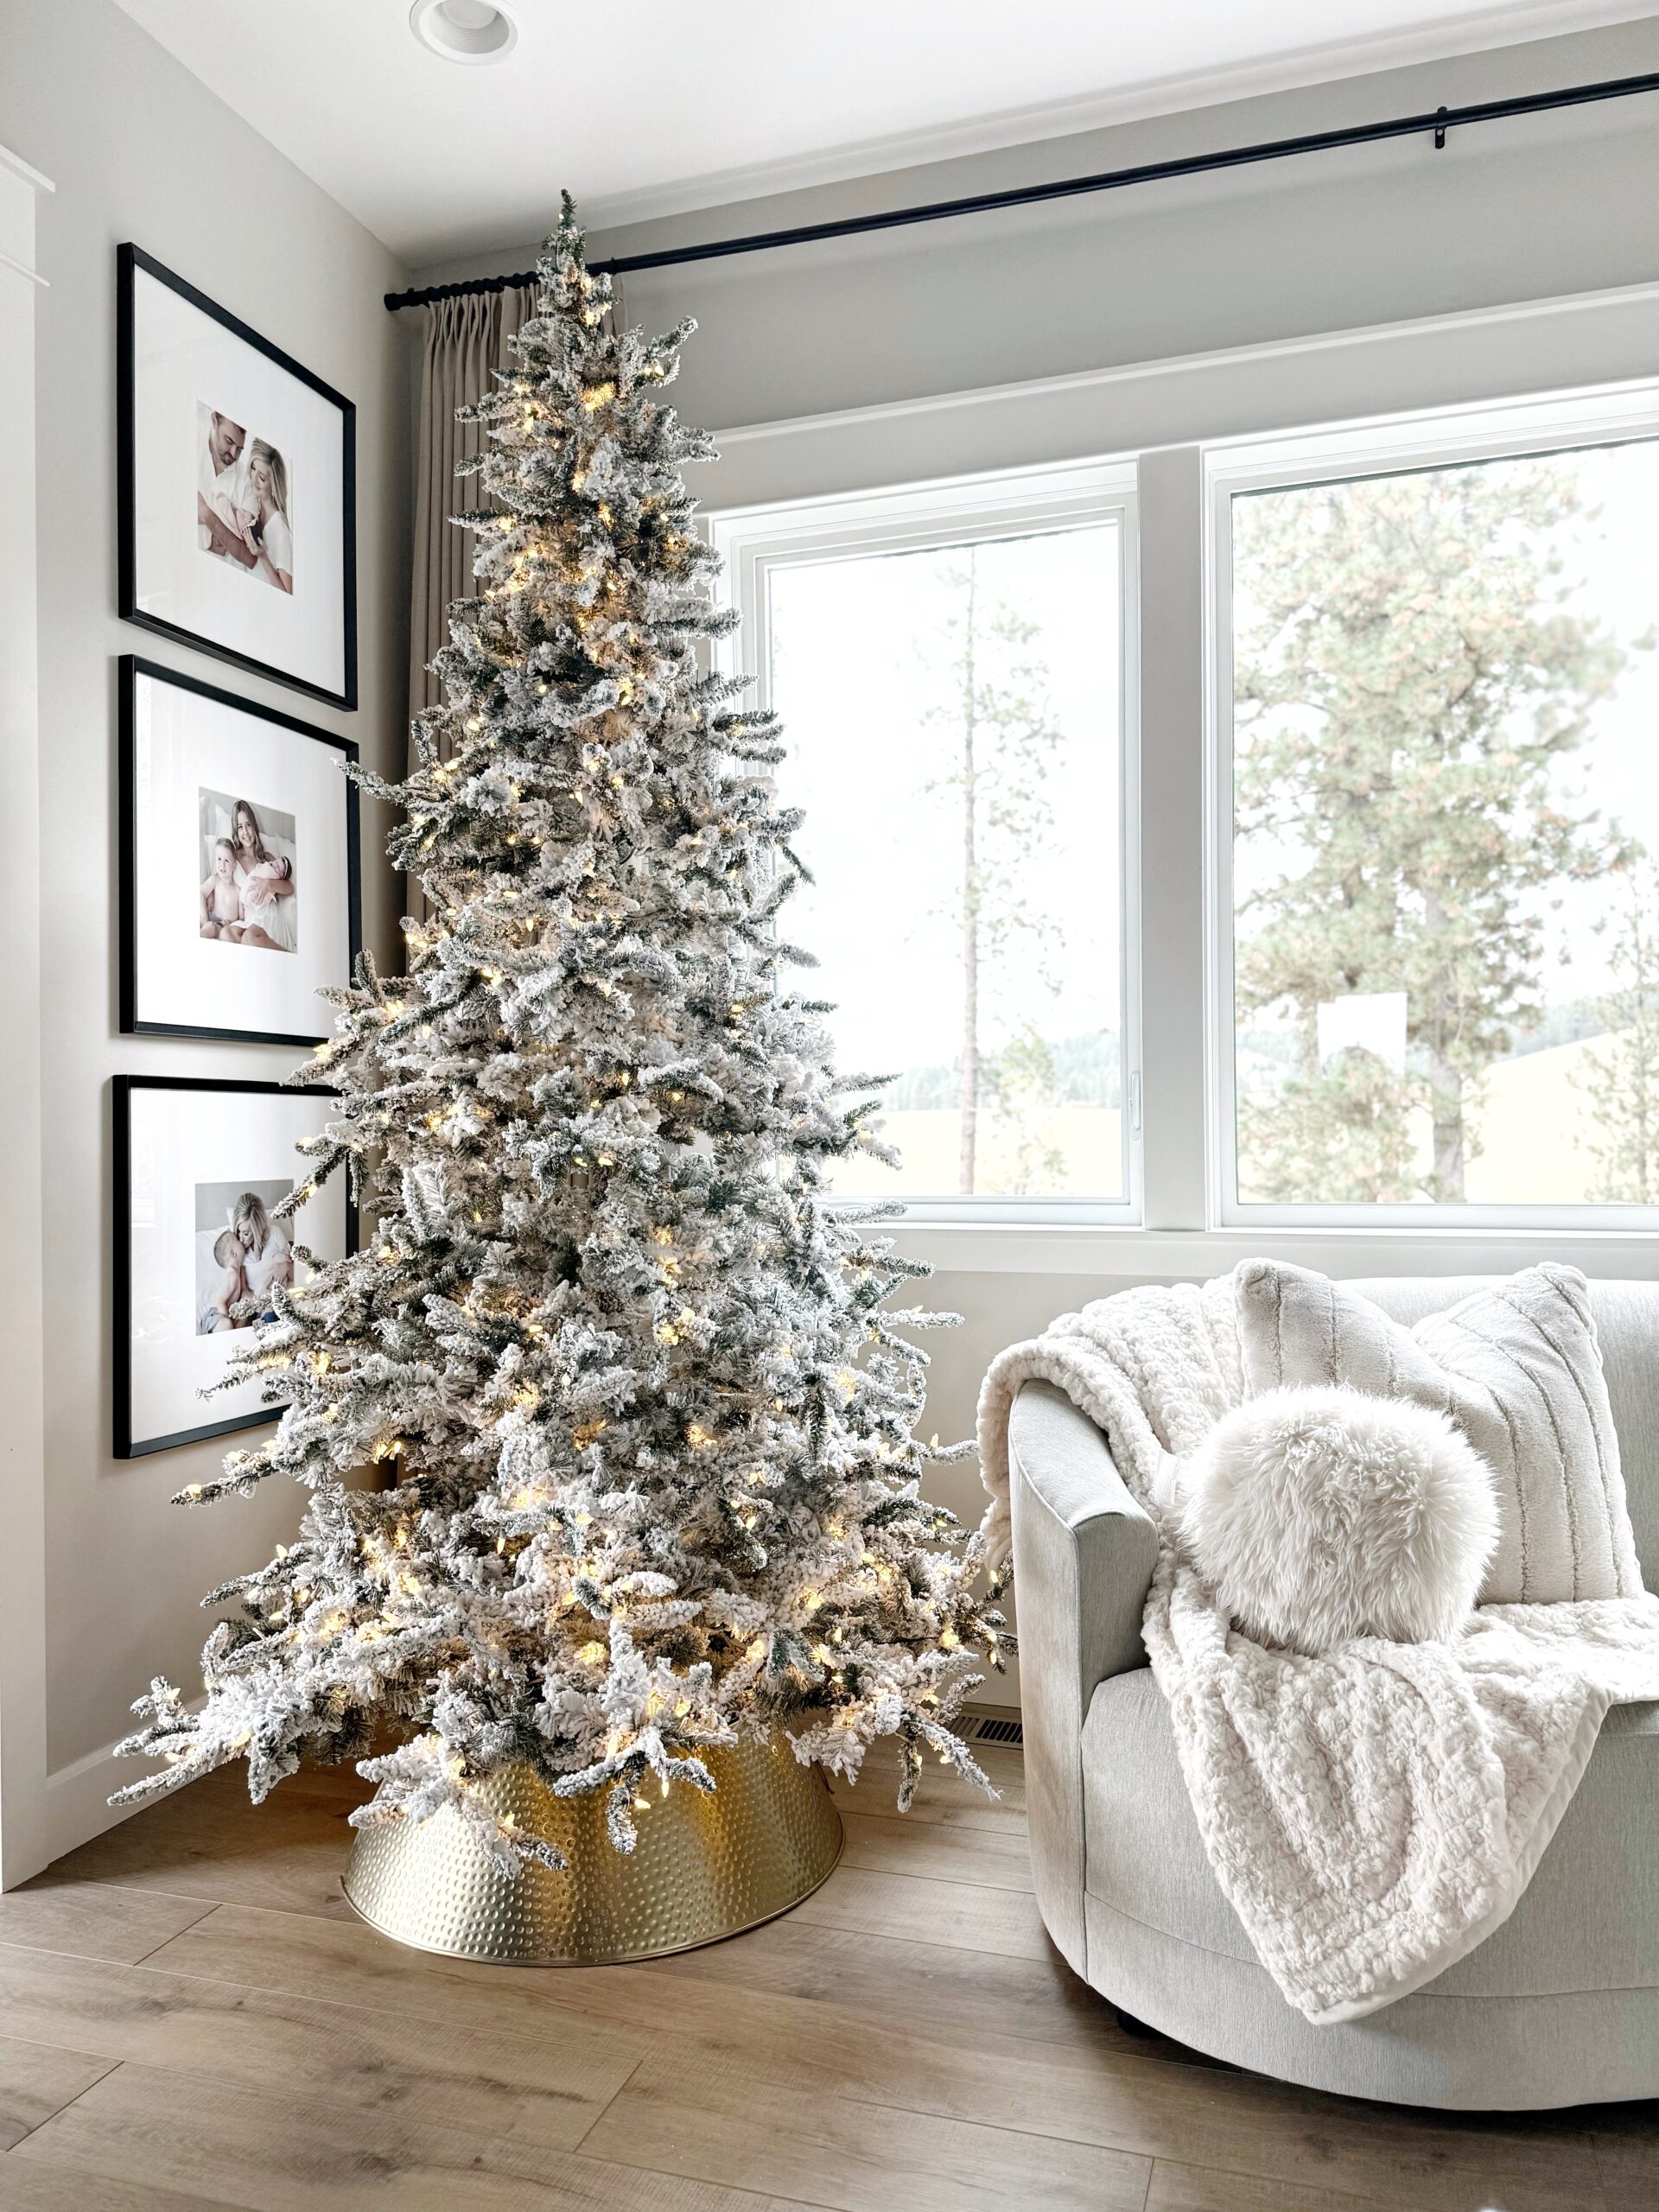 new holiday must haves | #new #holiday #musthaves #christmas #holidaydecor #seasonal #christmastree #snowytree #sofa #pillow #fauxfur #bedroom